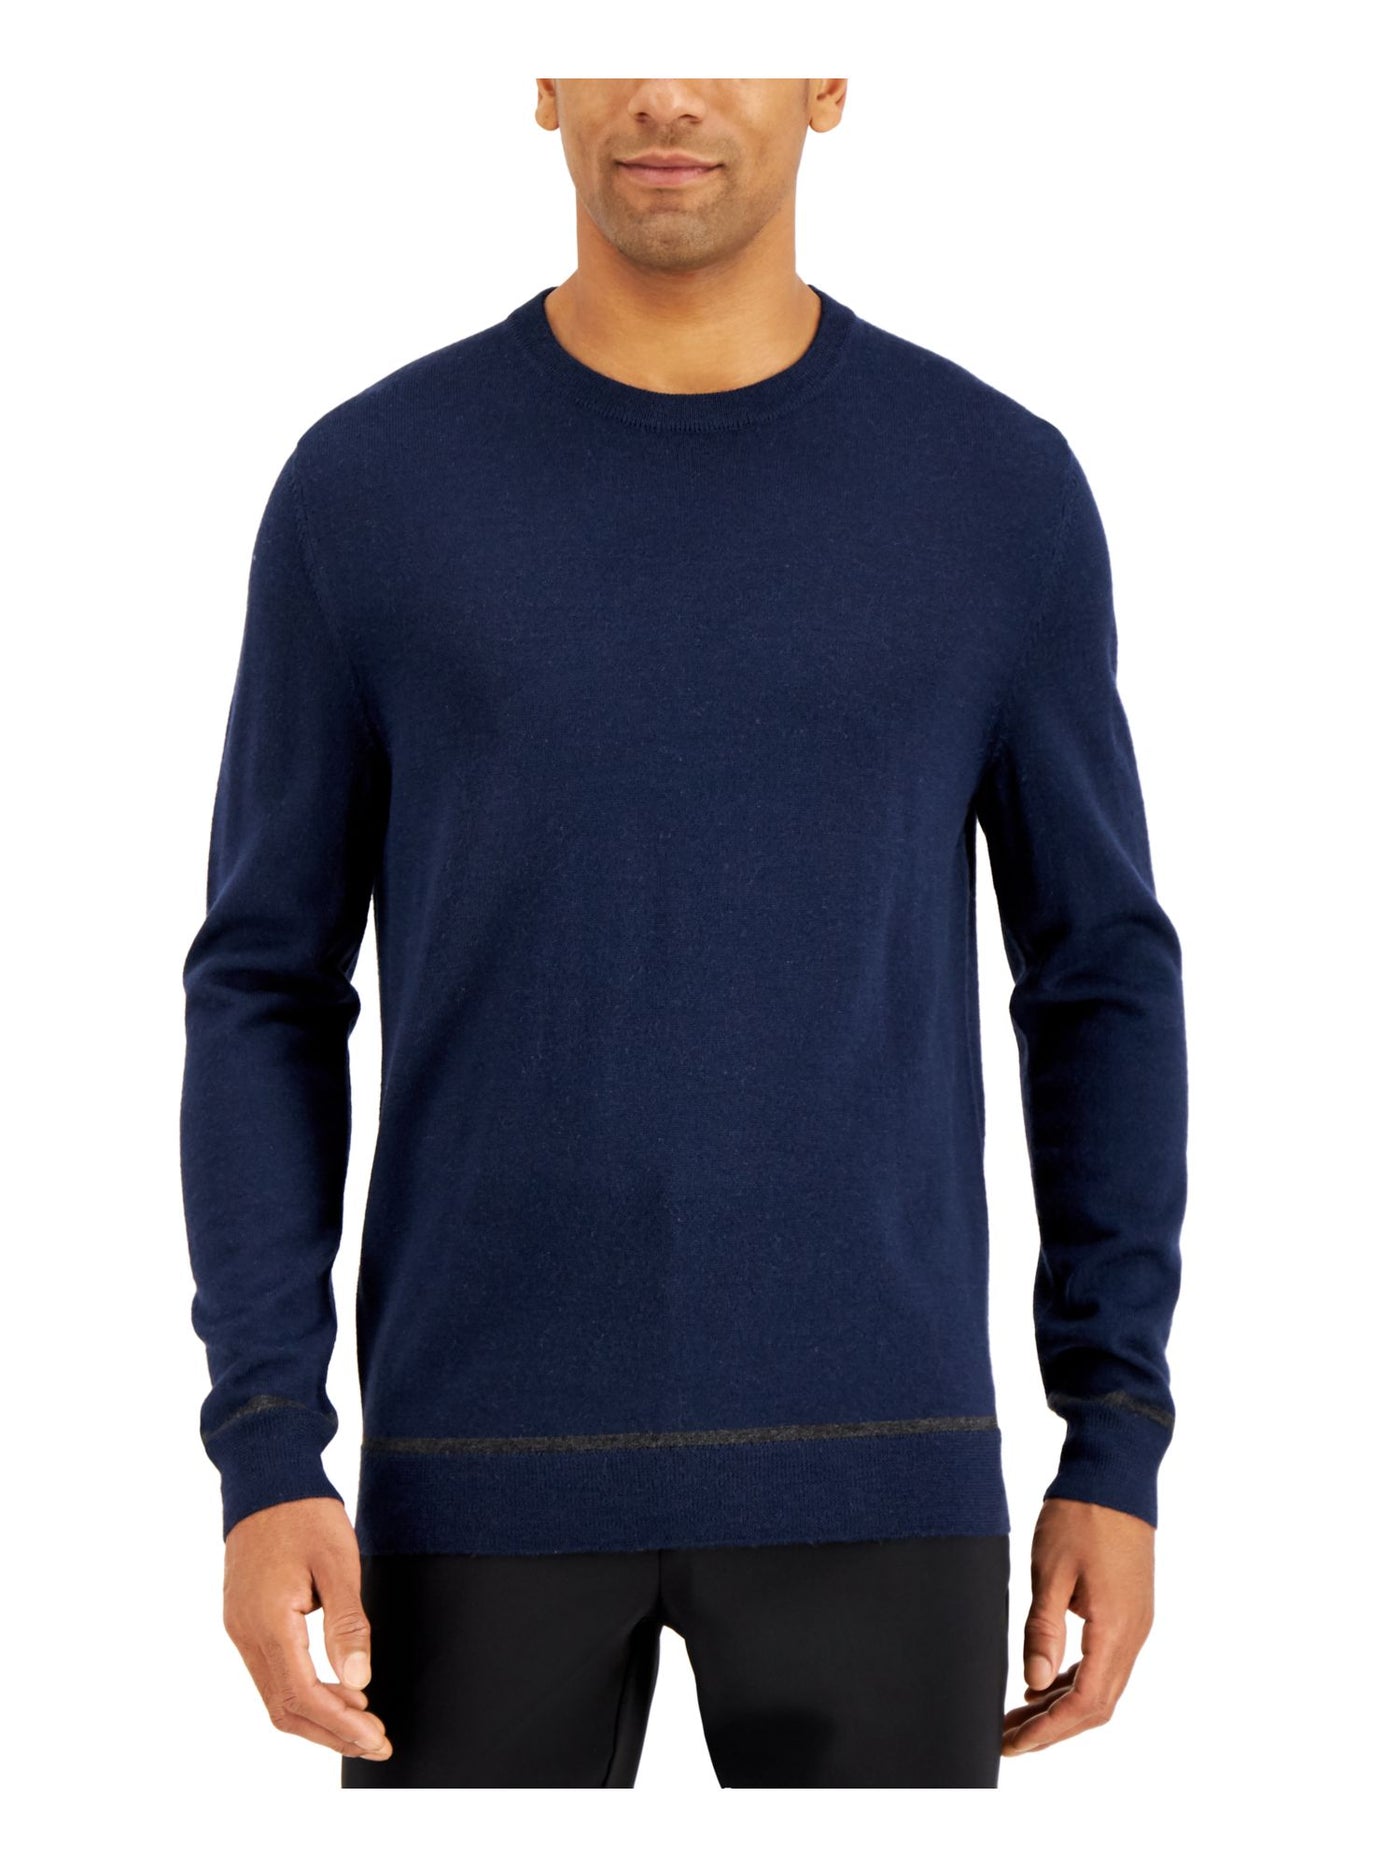 ALFANI Mens Navy Crew Neck Classic Fit Wool Blend Pullover Sweater S